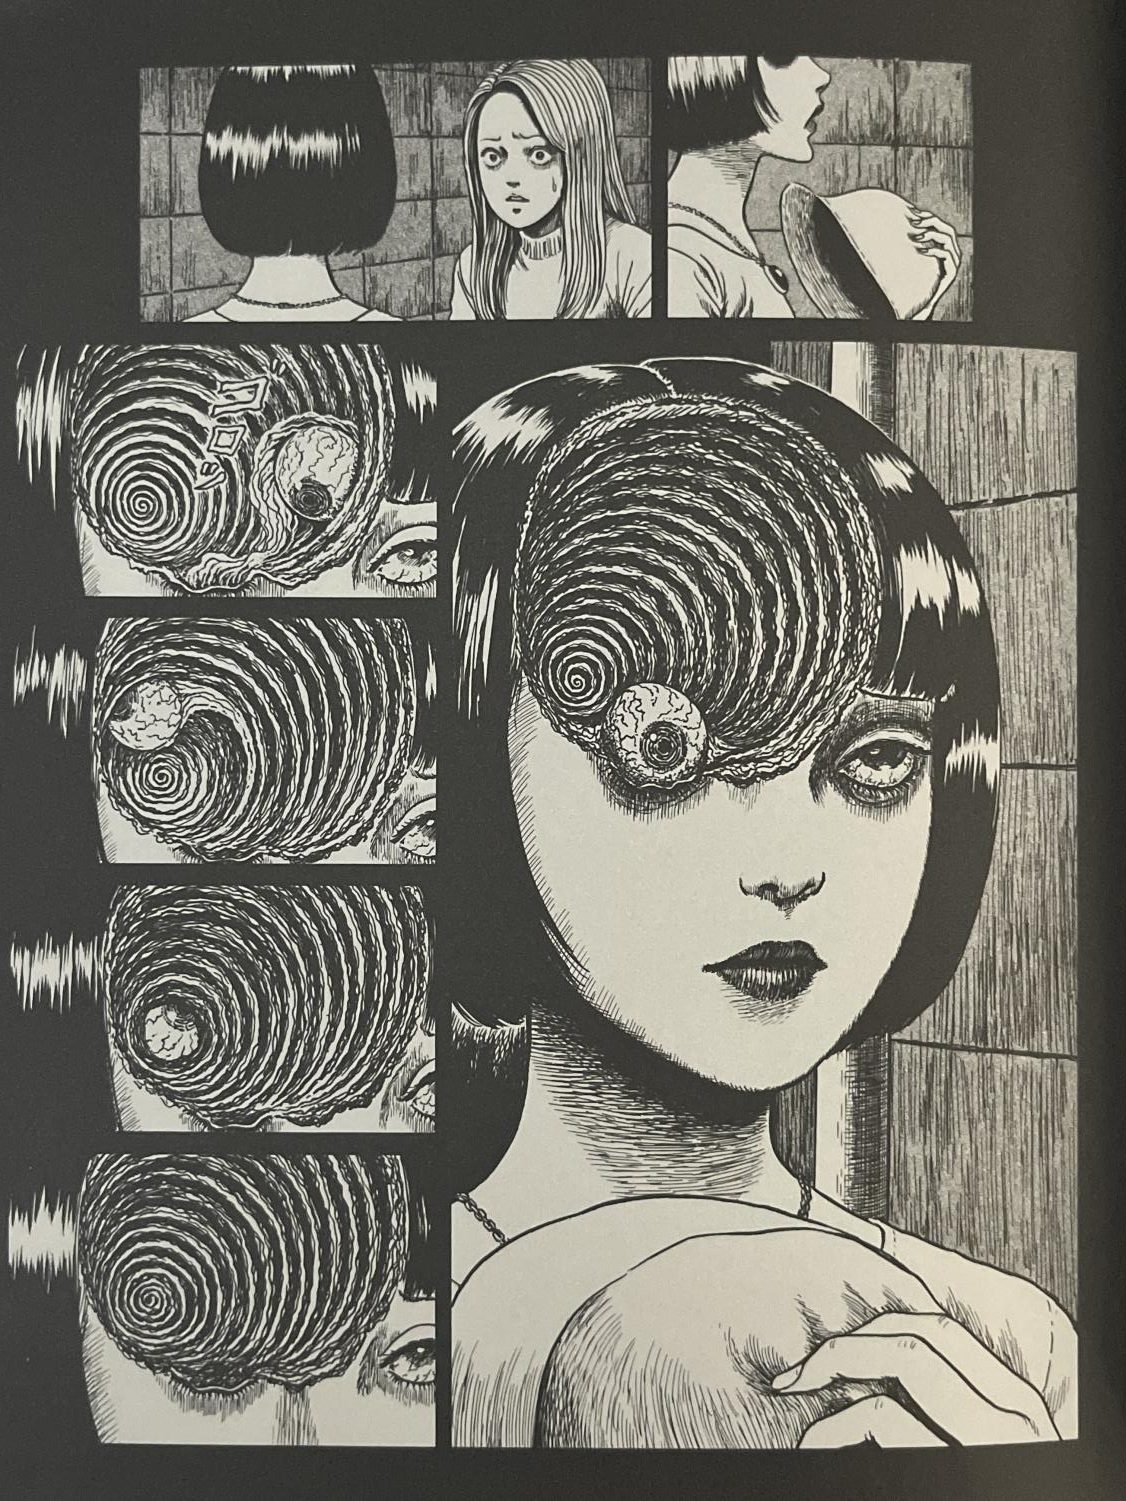 Junji Ito Collection: Where to Read & Start With the Horror Manga